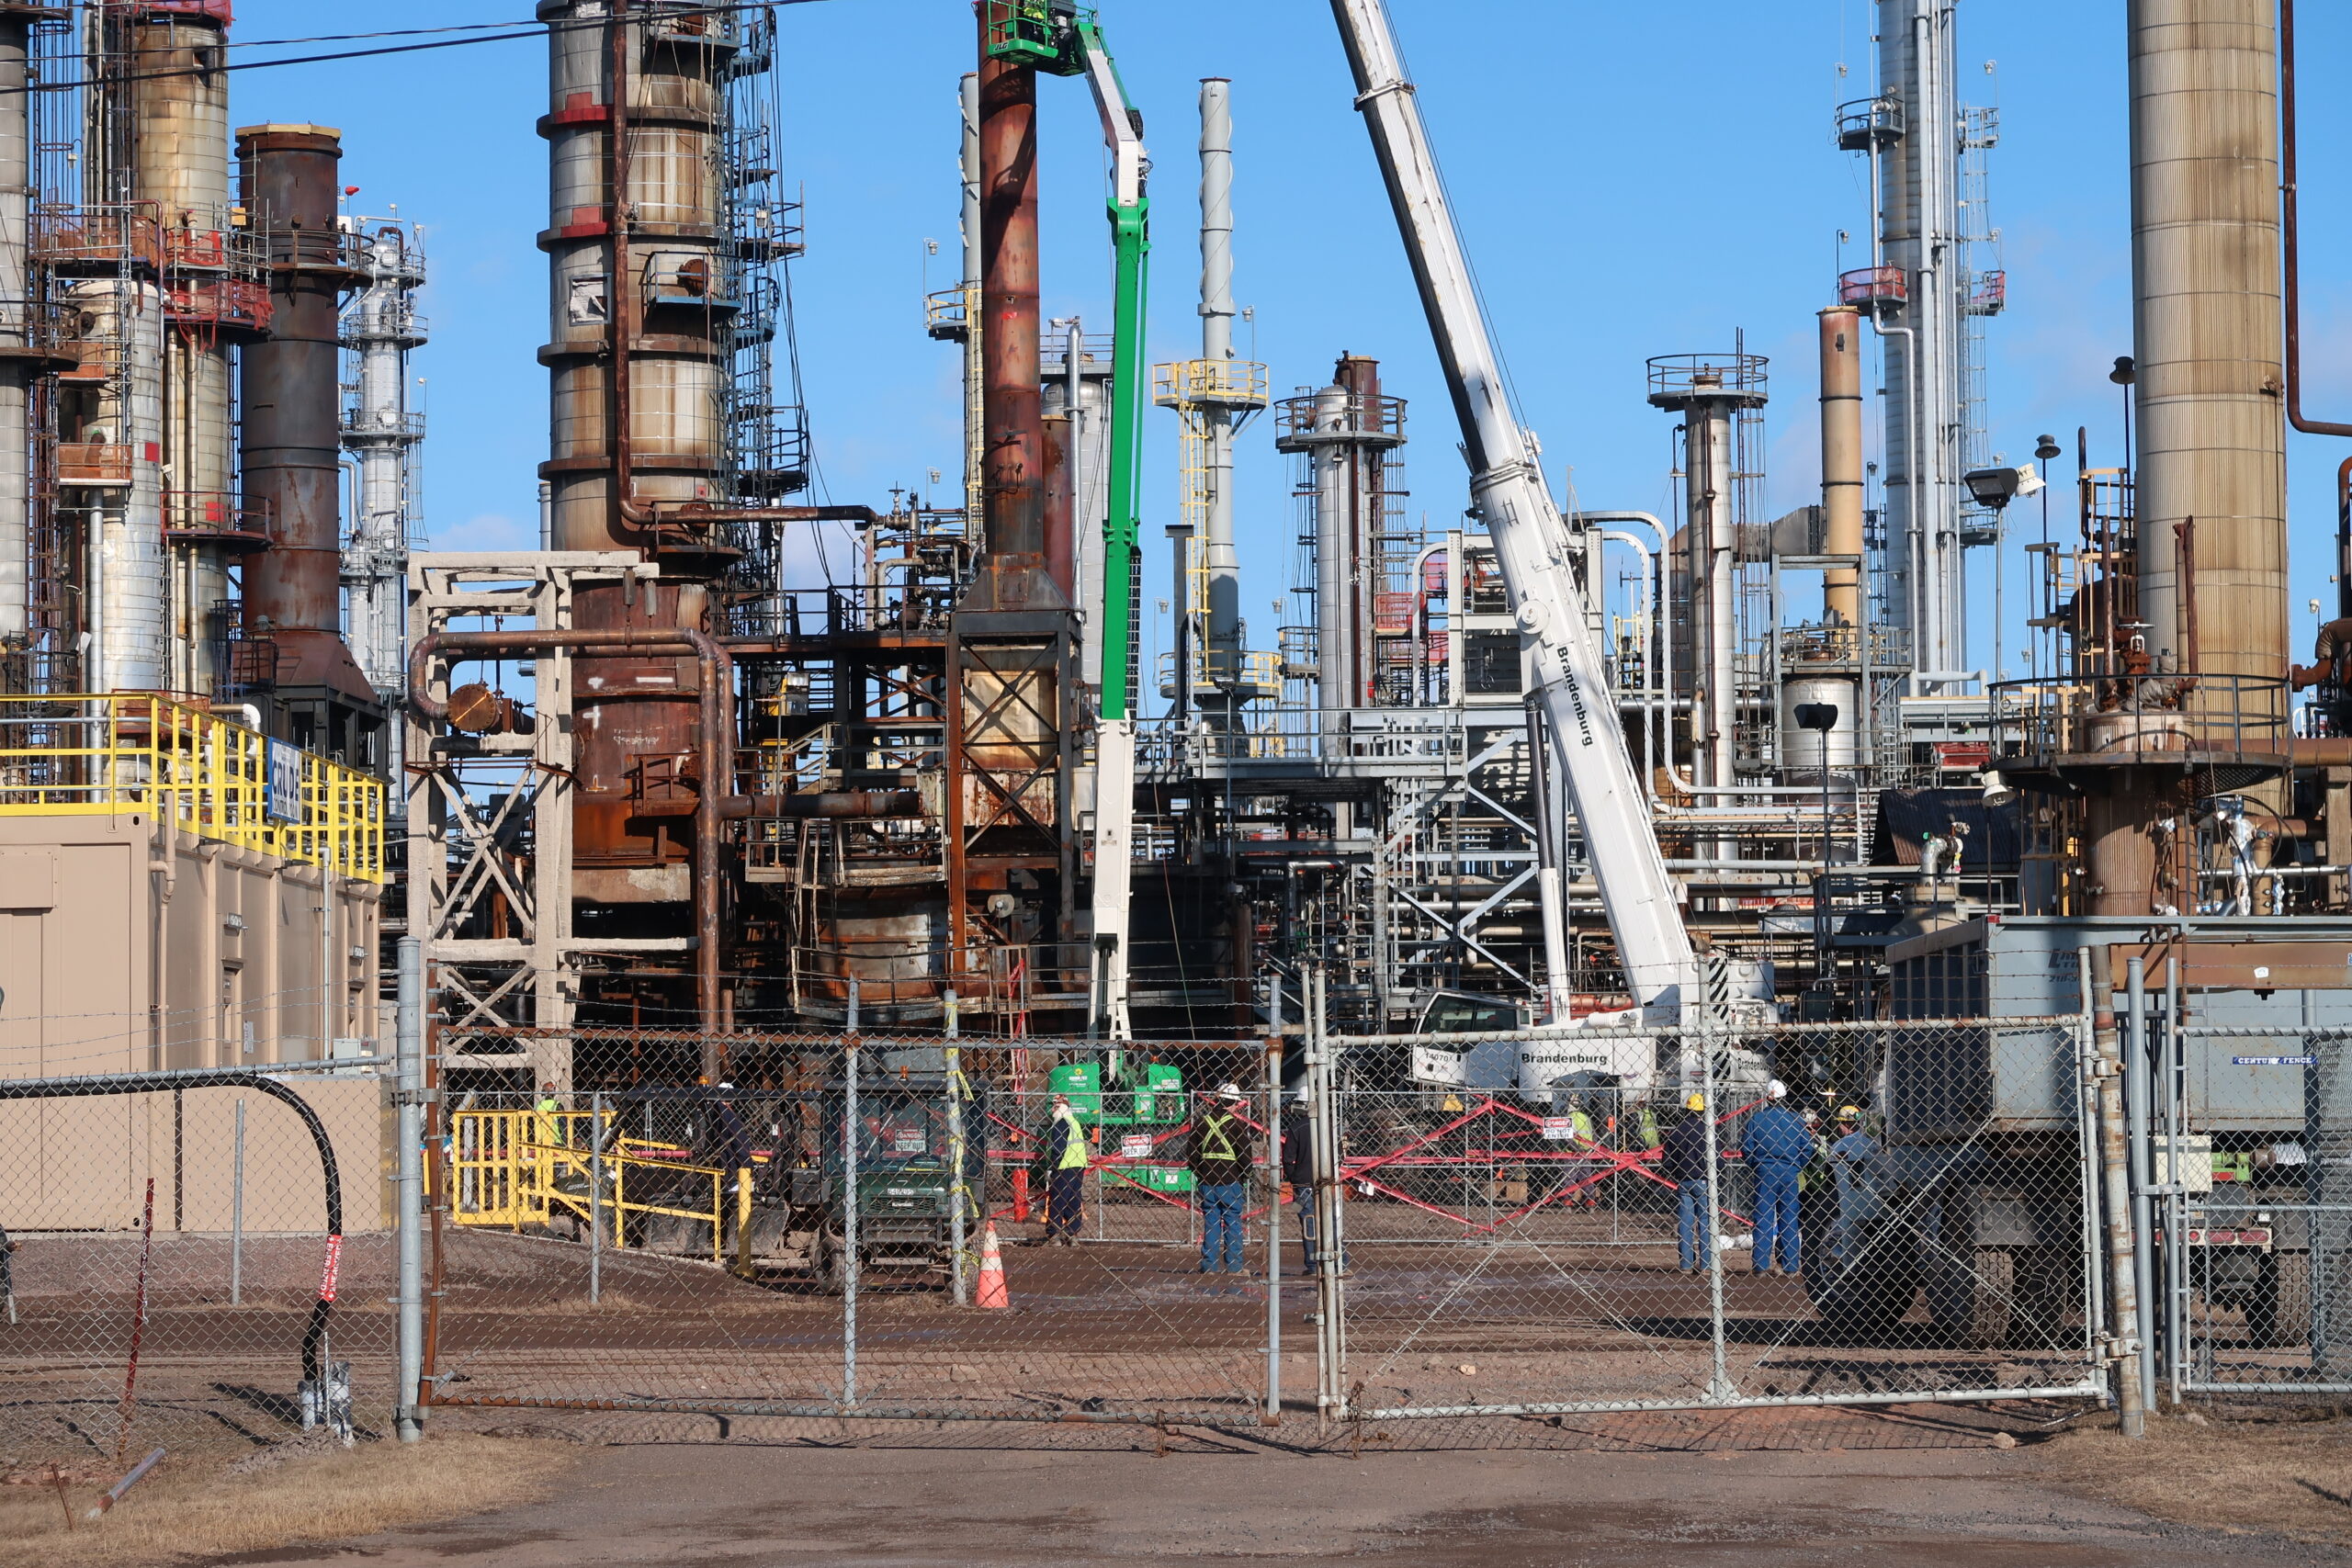 Demolition and cleanup efforts are ongoing at the Husky Energy oil refinery